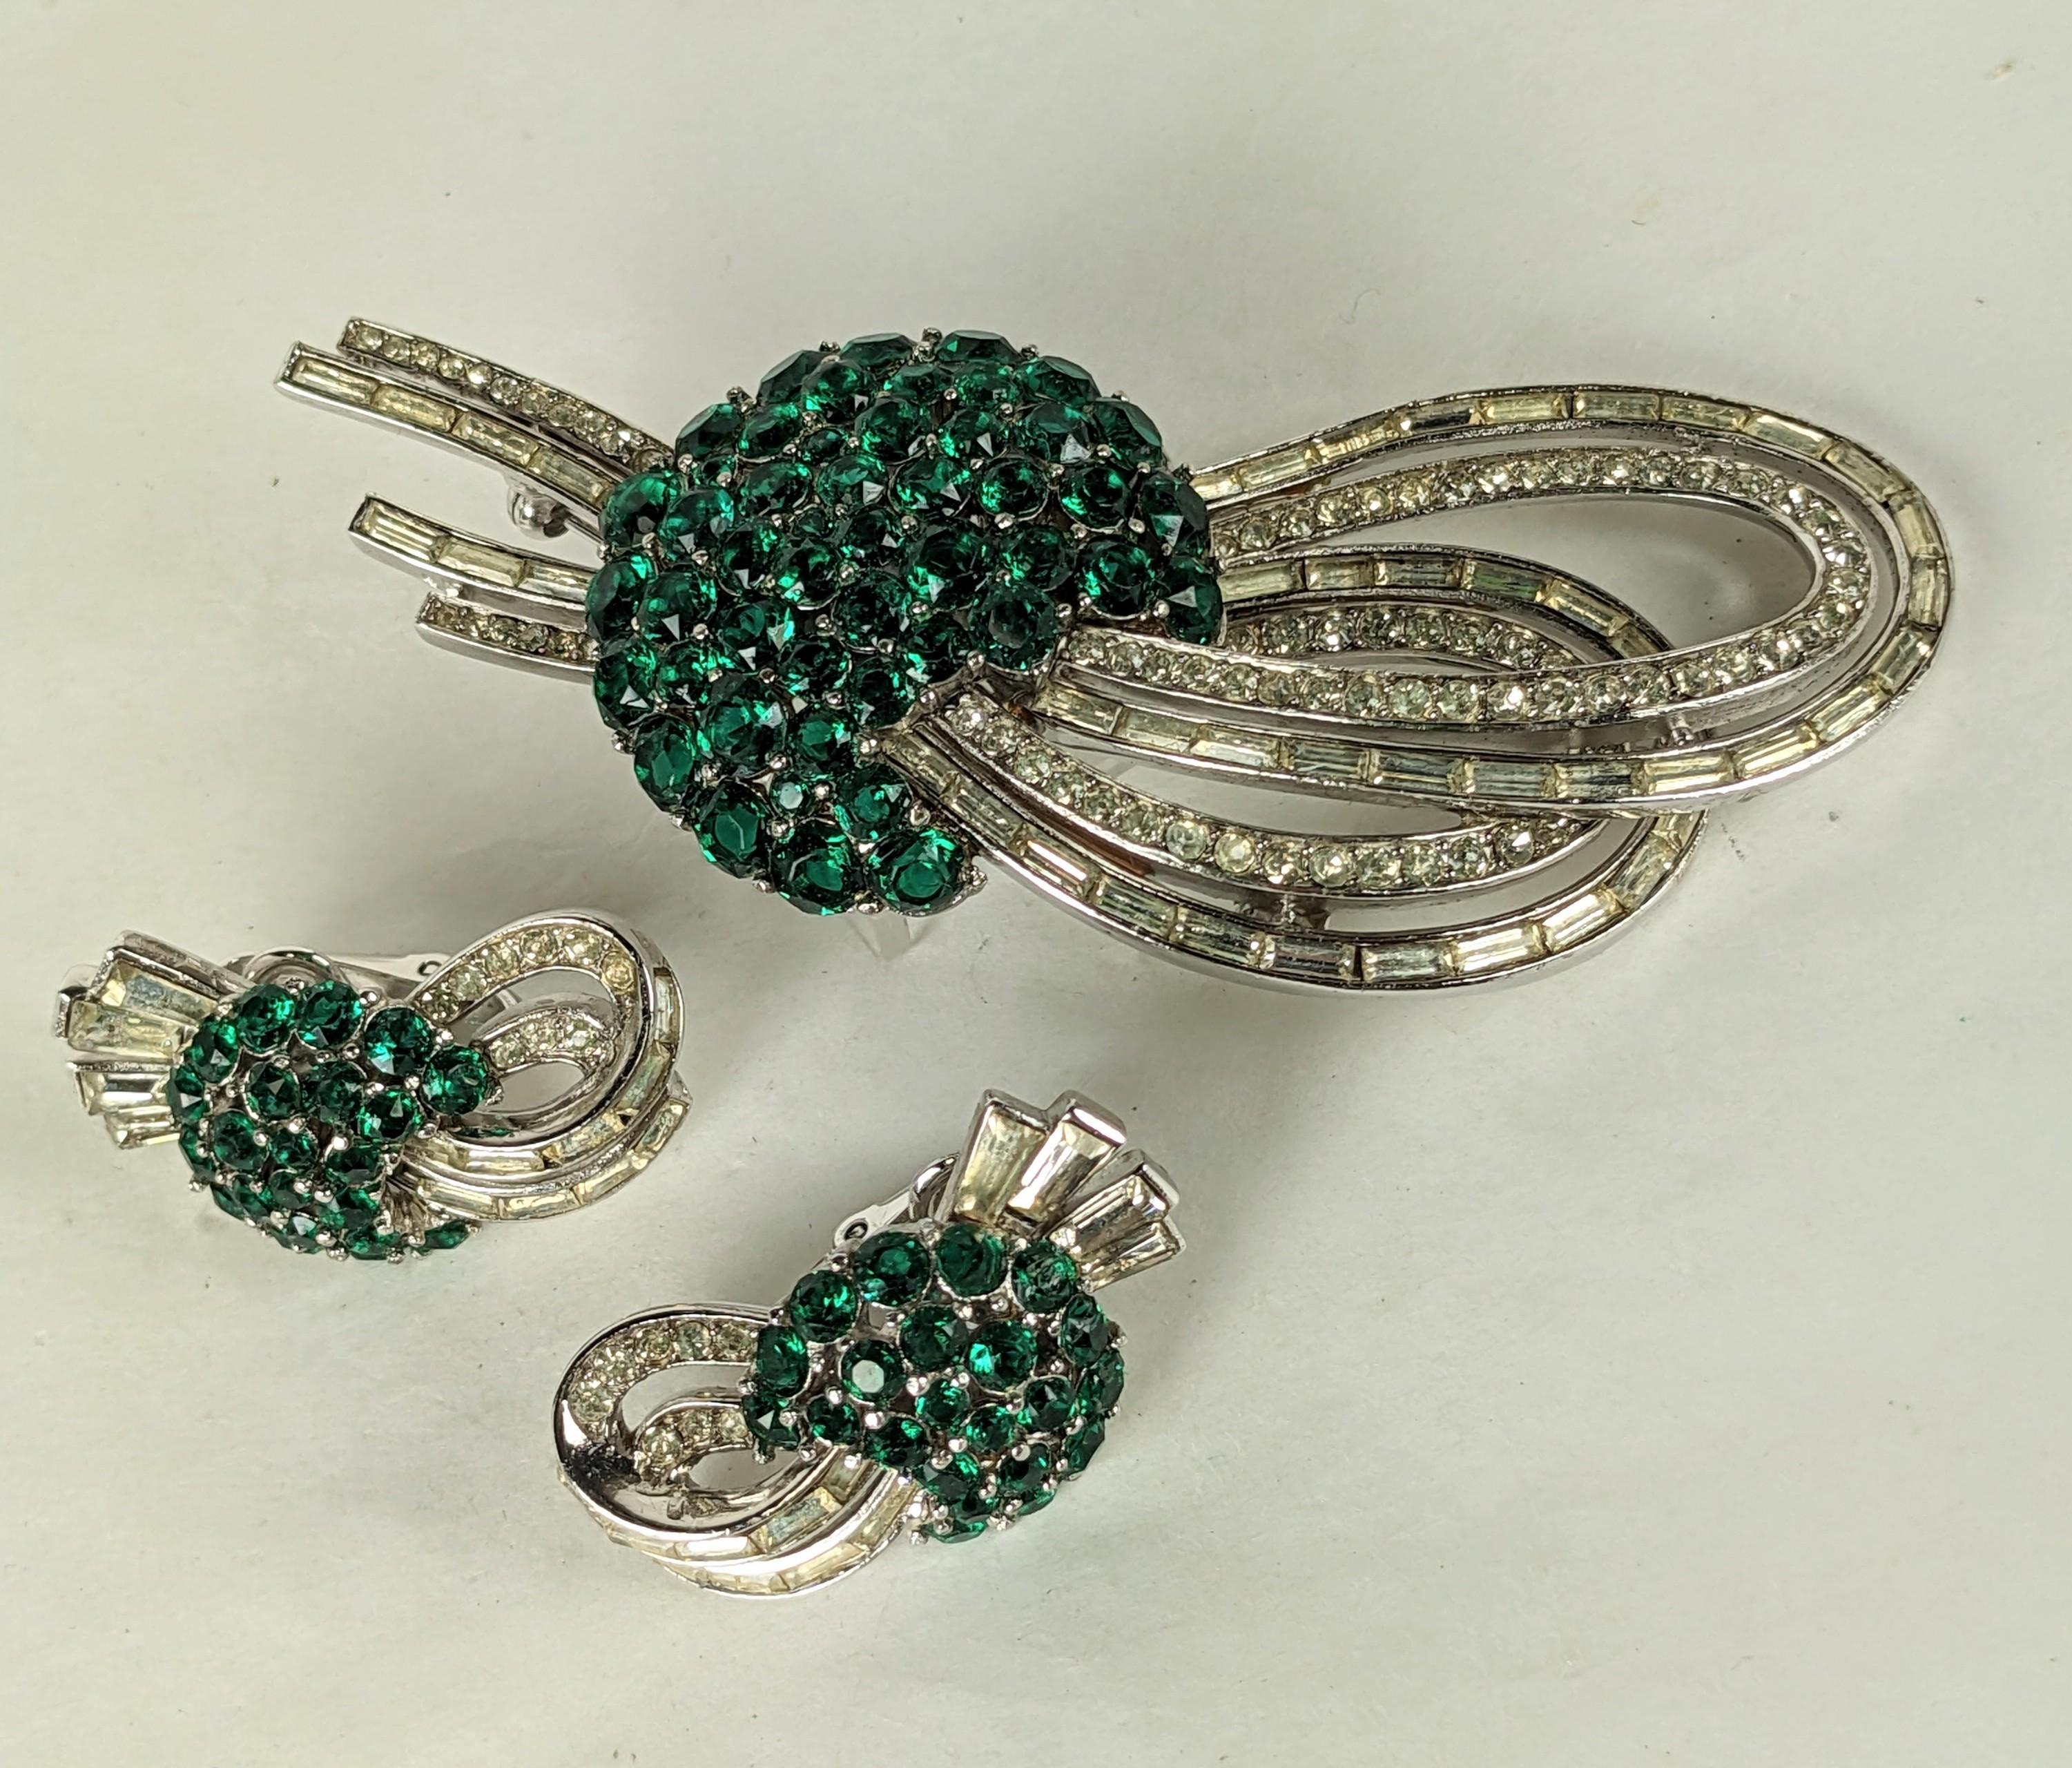 Elegant Trifari Emerald Comet Suite from the 1950's by Alfred Phillipe. Brooch has a central motif of pave faux emeralds with loops of pave and baguette set swirls. Matching clip earrings.
1950's USA. 3.25